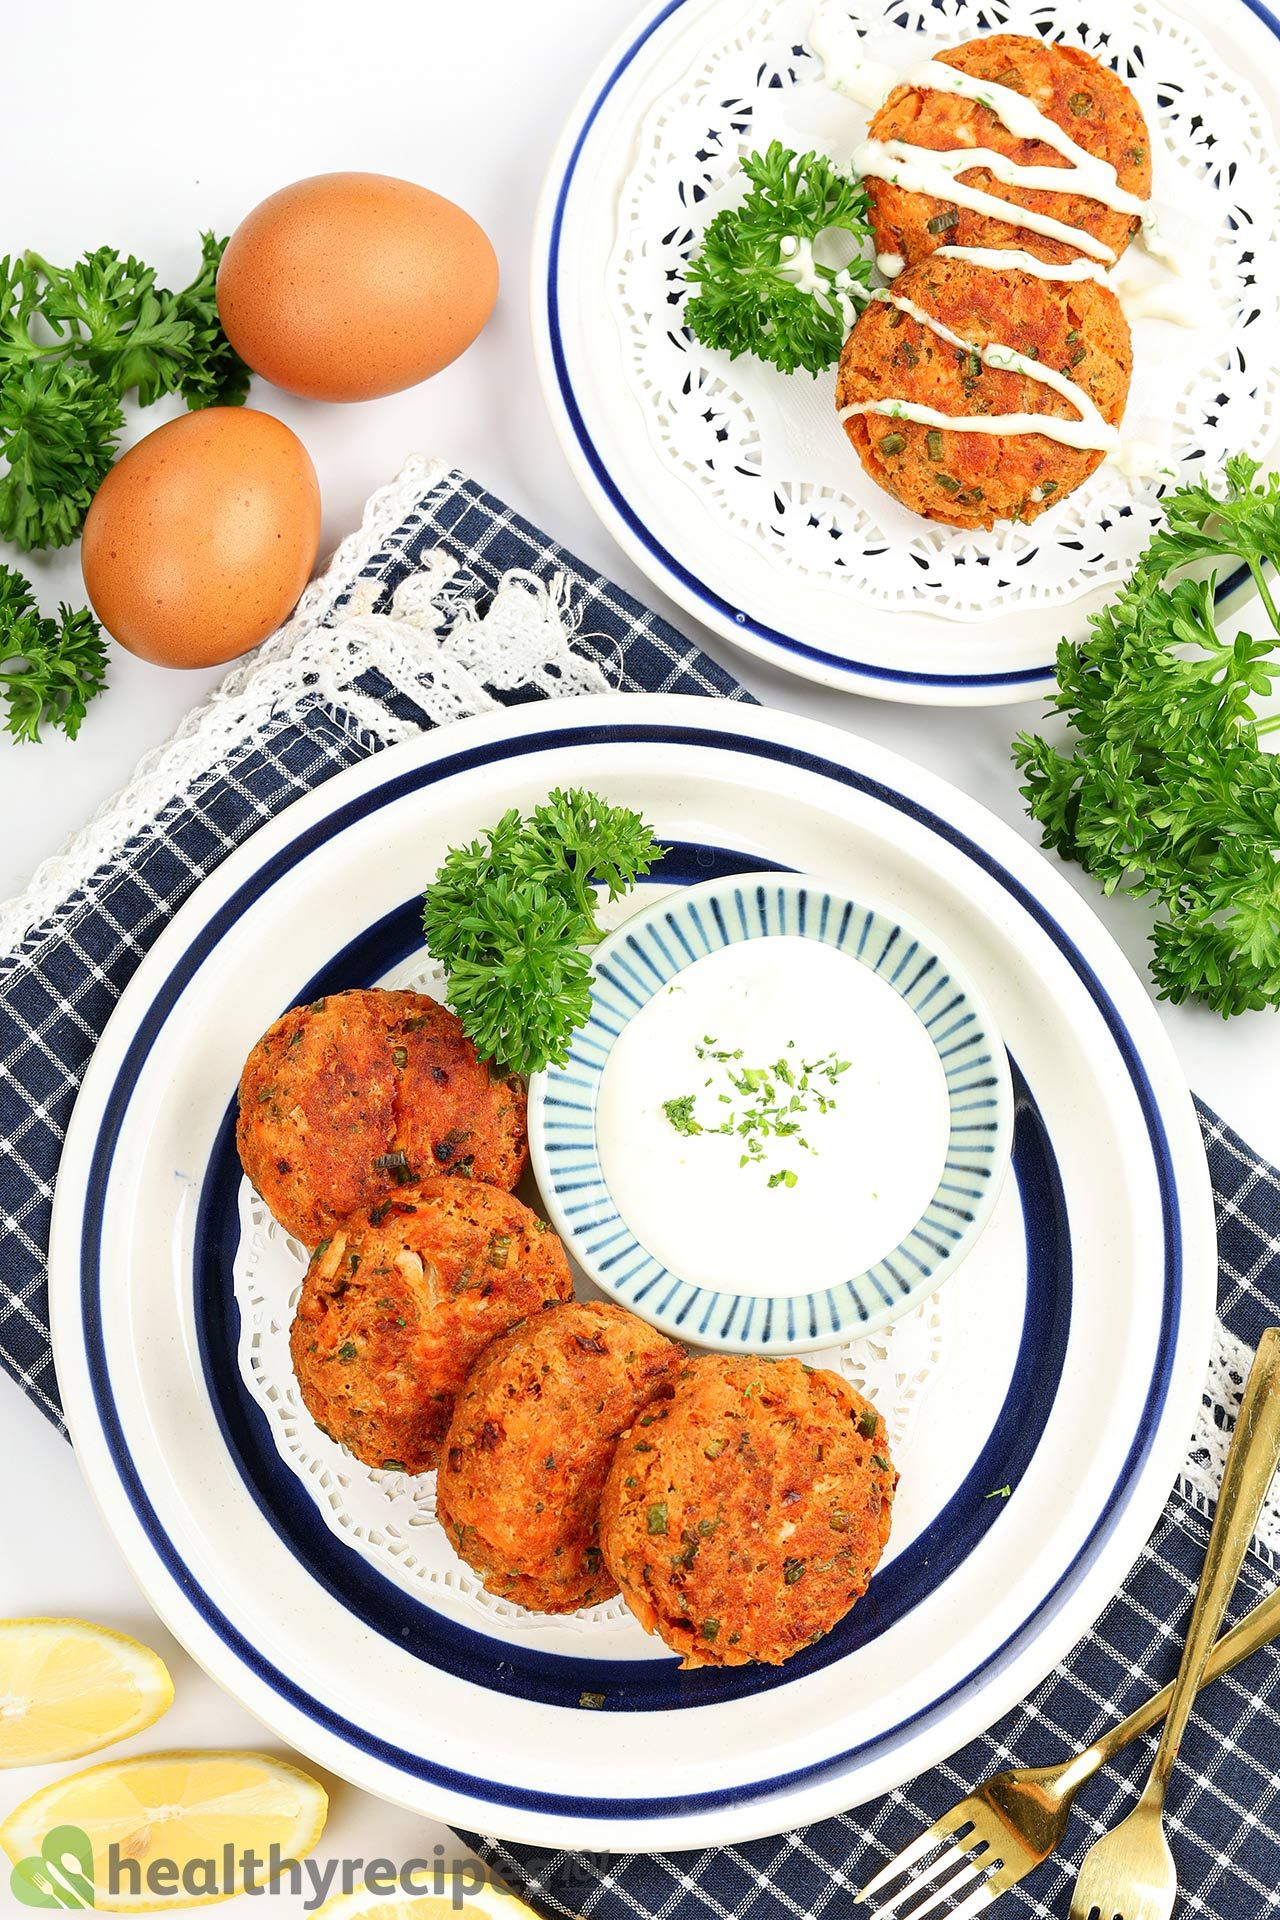 What to Serve With Salmon Patties